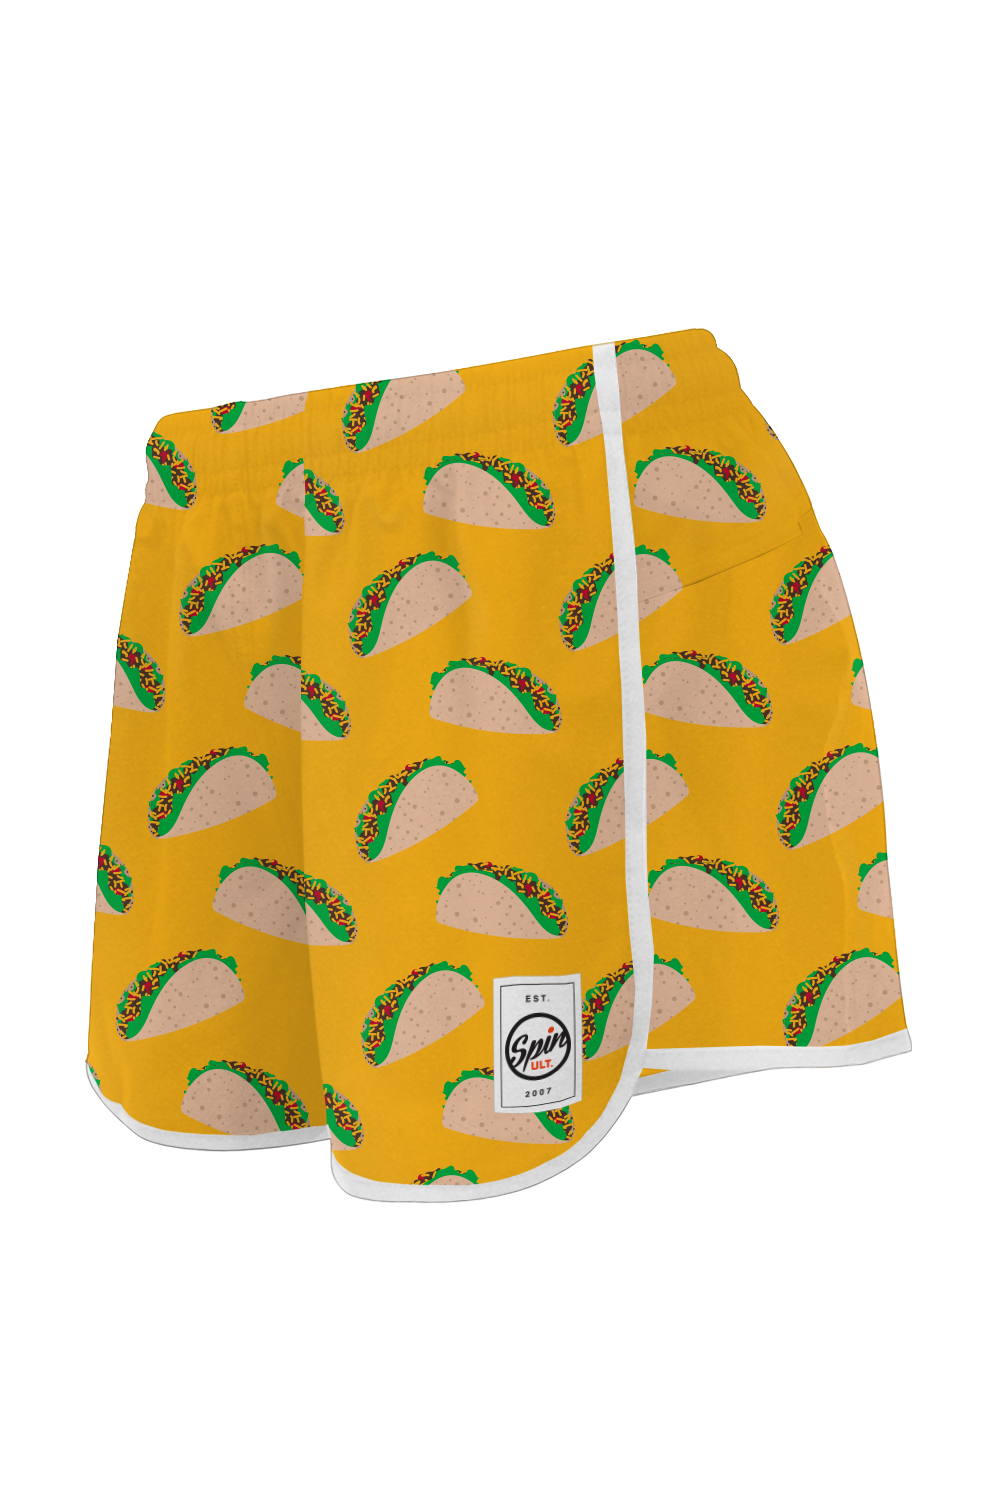 Spicy Taco Racer Shorts